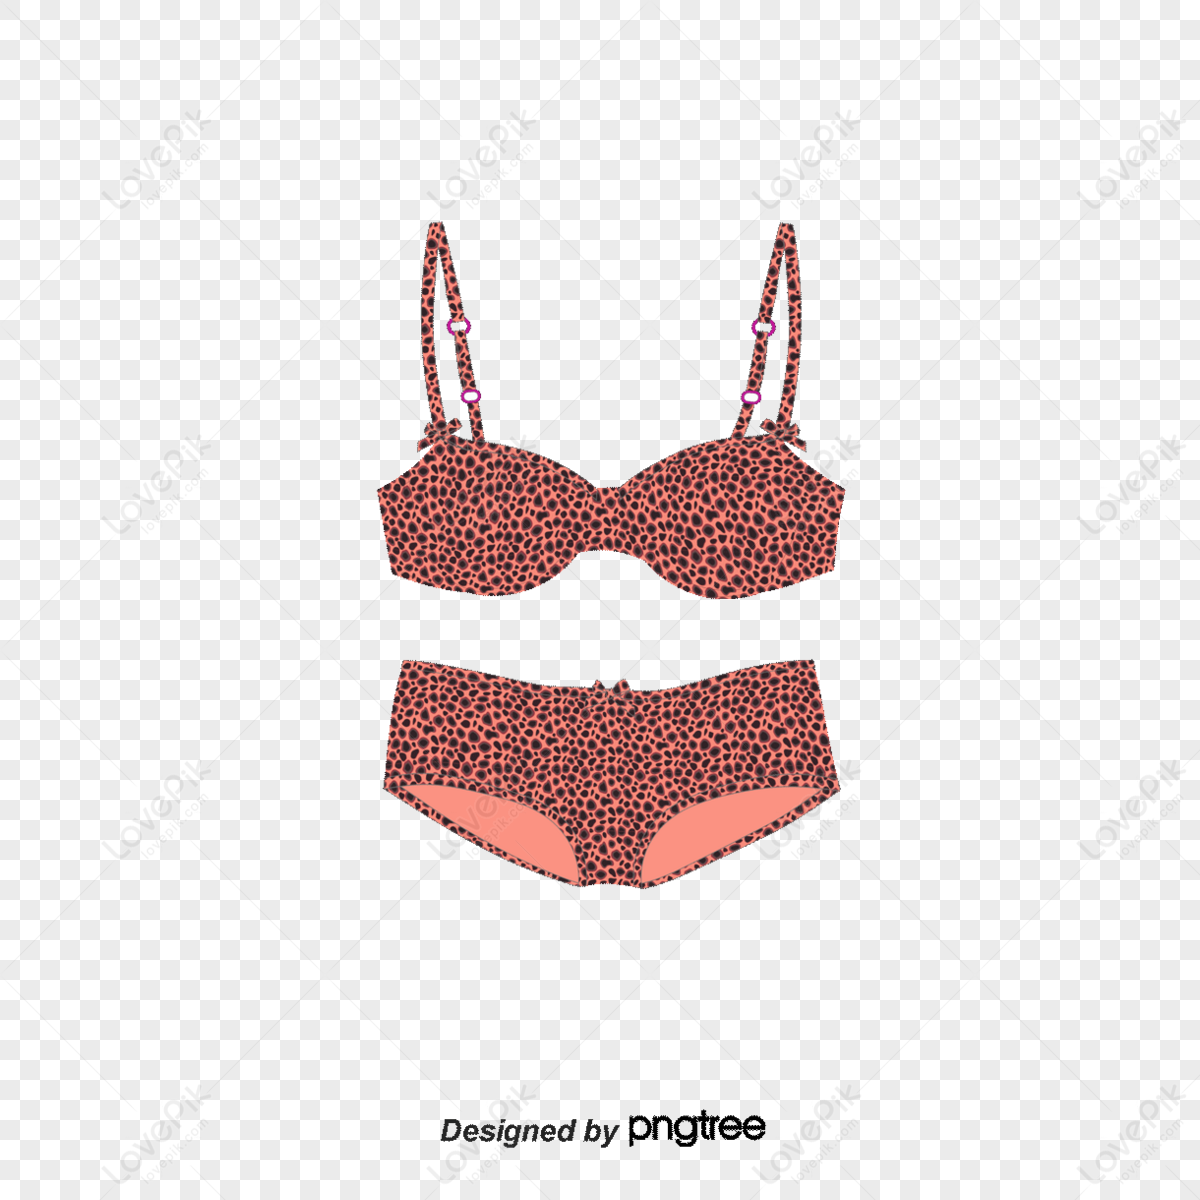 Red Underwear PNG Images With Transparent Background